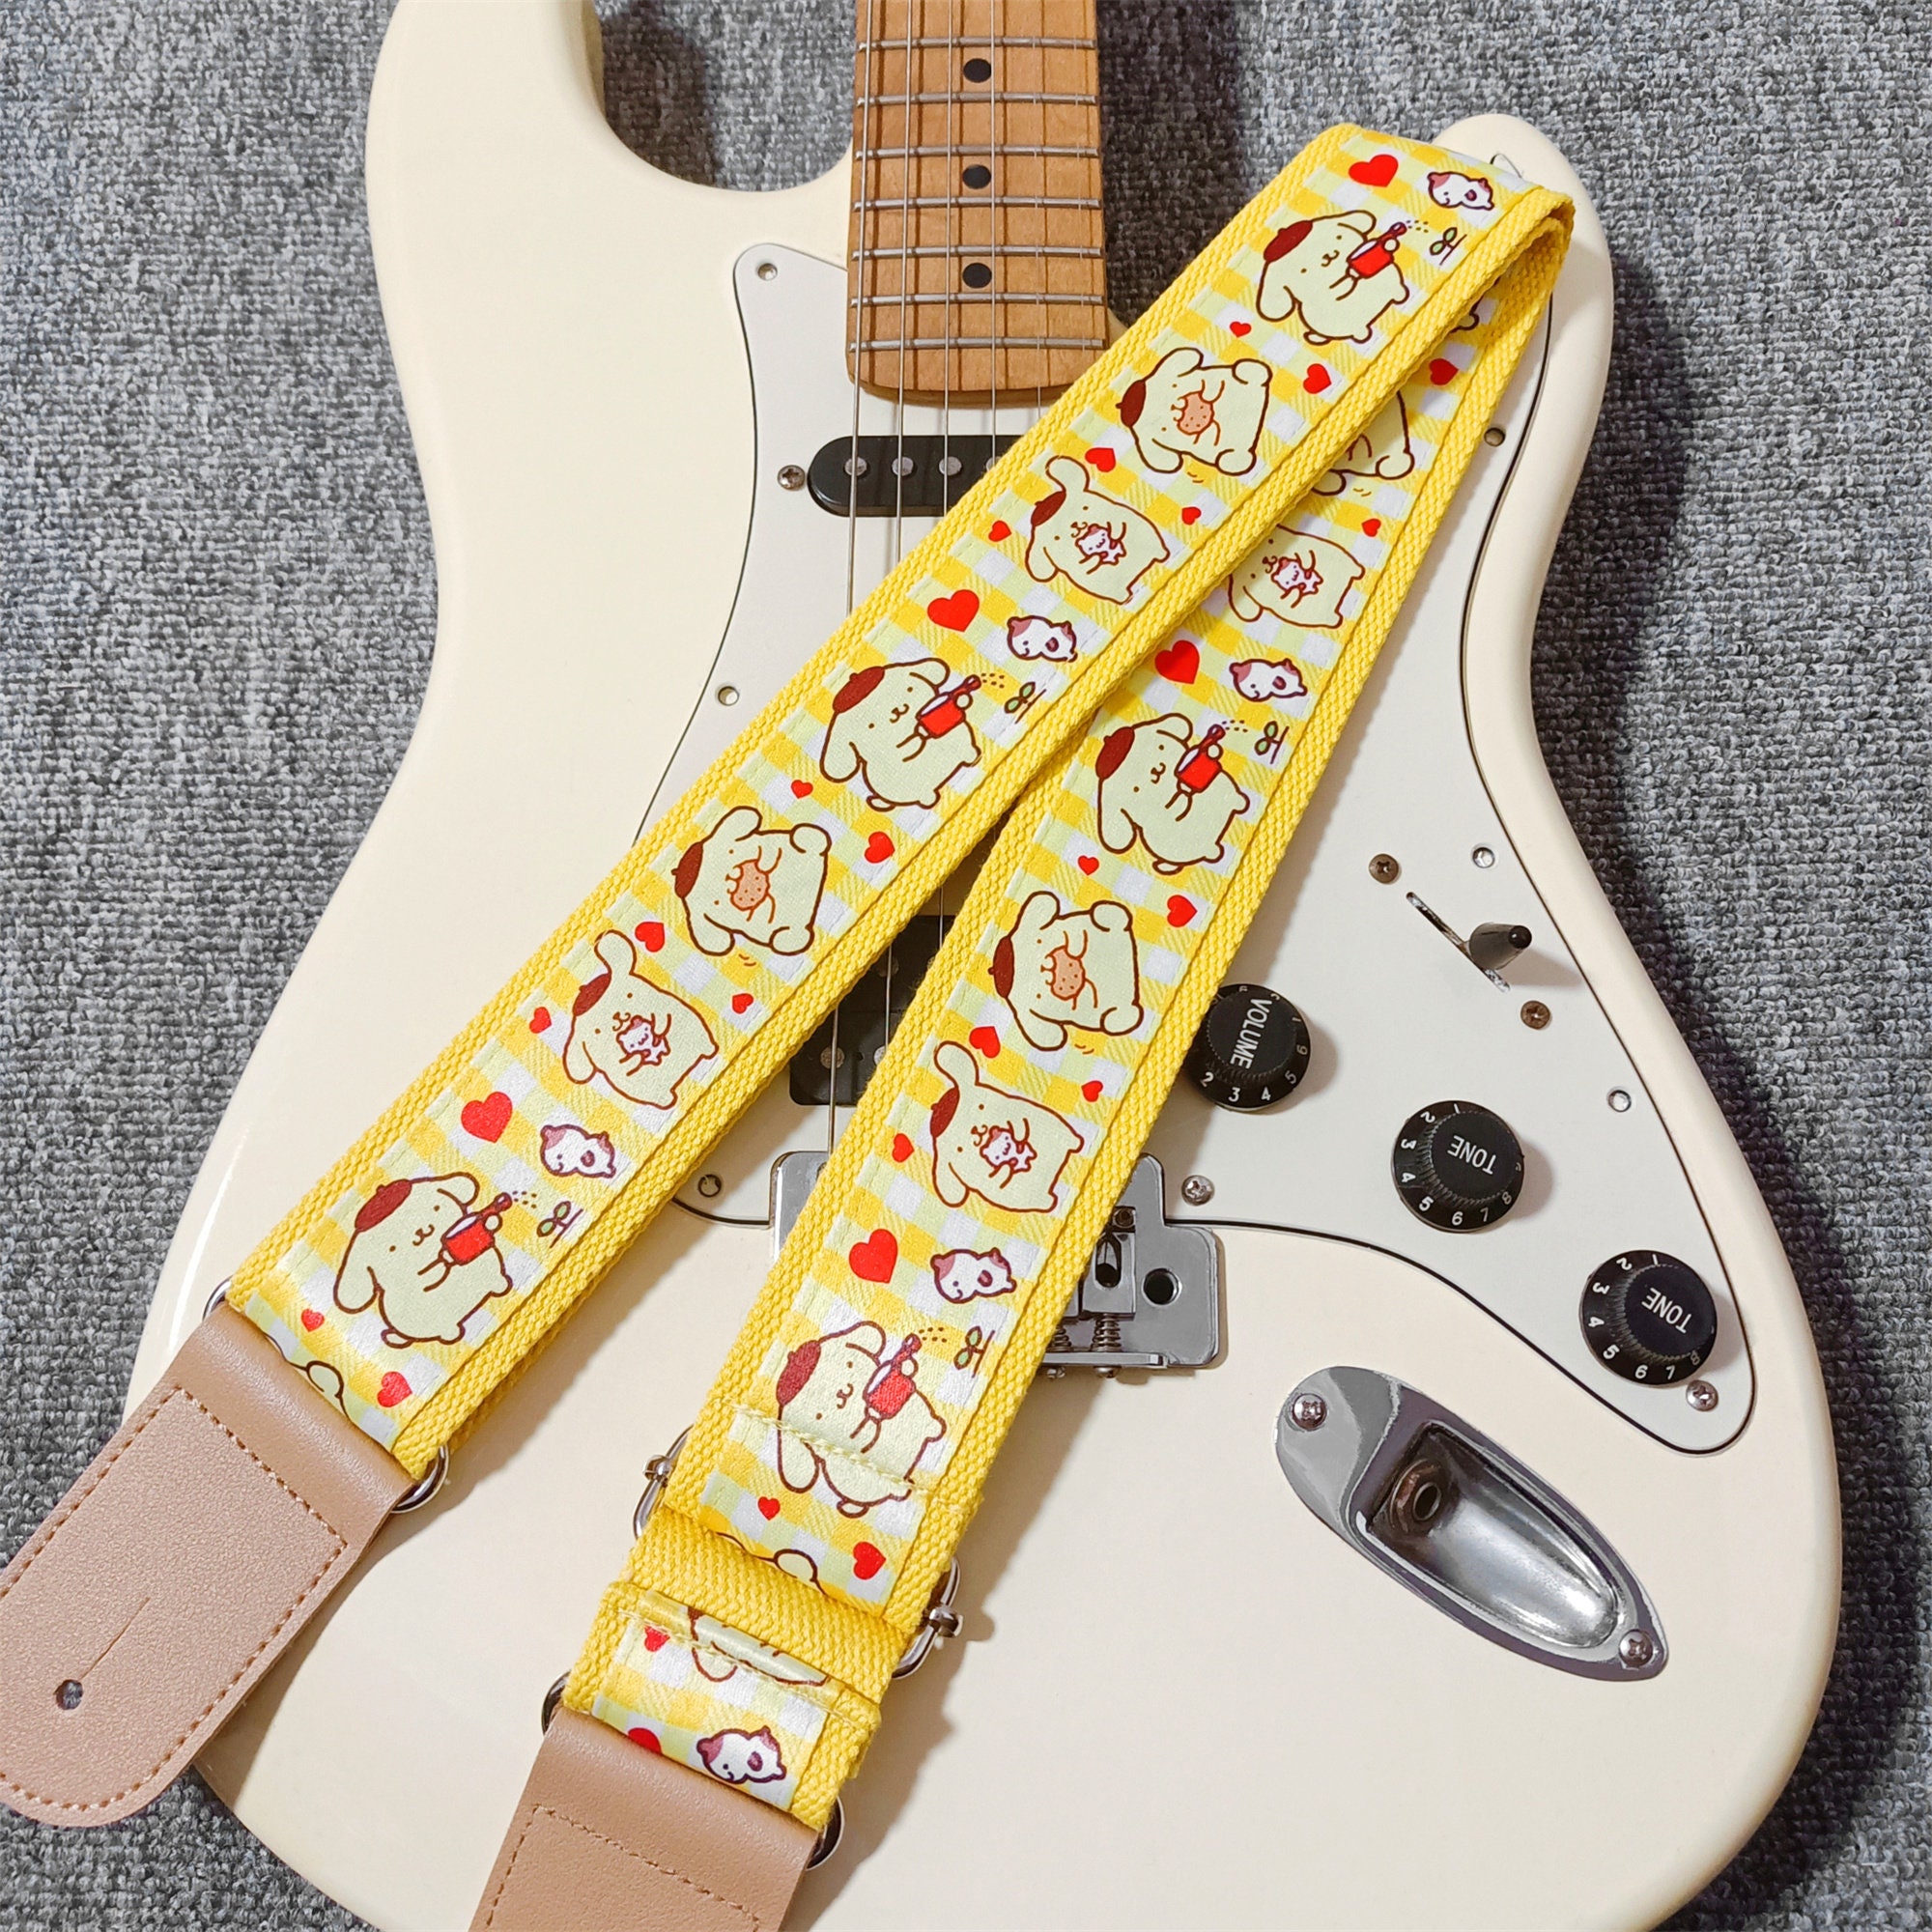 Cotton Guitar Strap Yellow Spring Blossom Flowers Includes 2 Picks + Strap Locks + Strap Button. for Bass, Electric Acoustic Guitar!